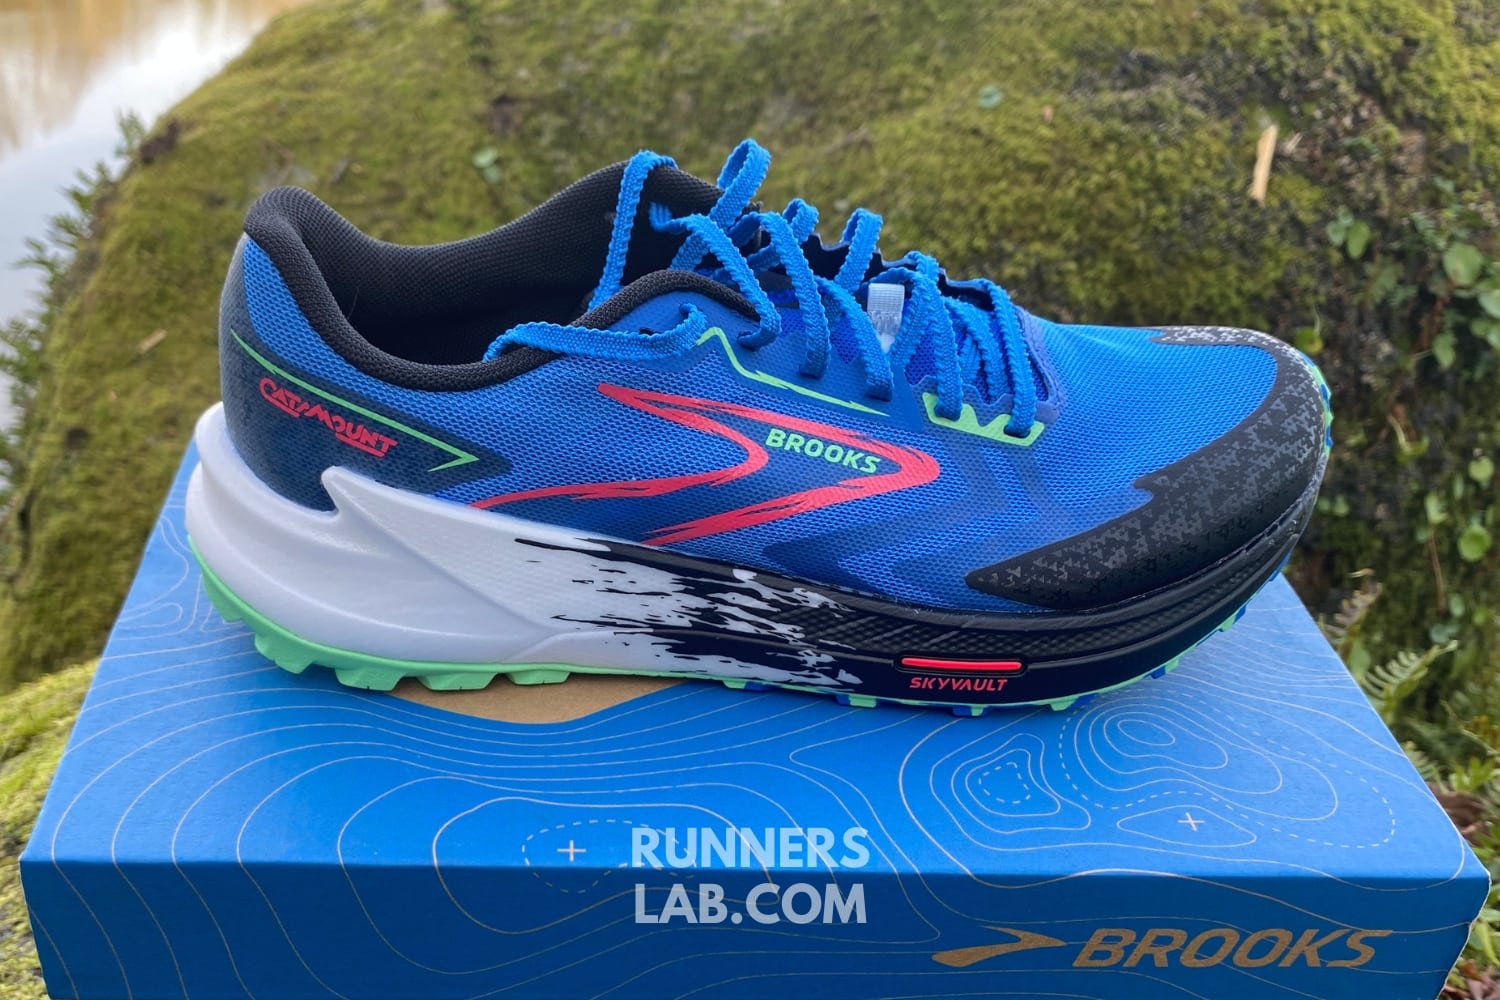 Brooks Catamount 3 review